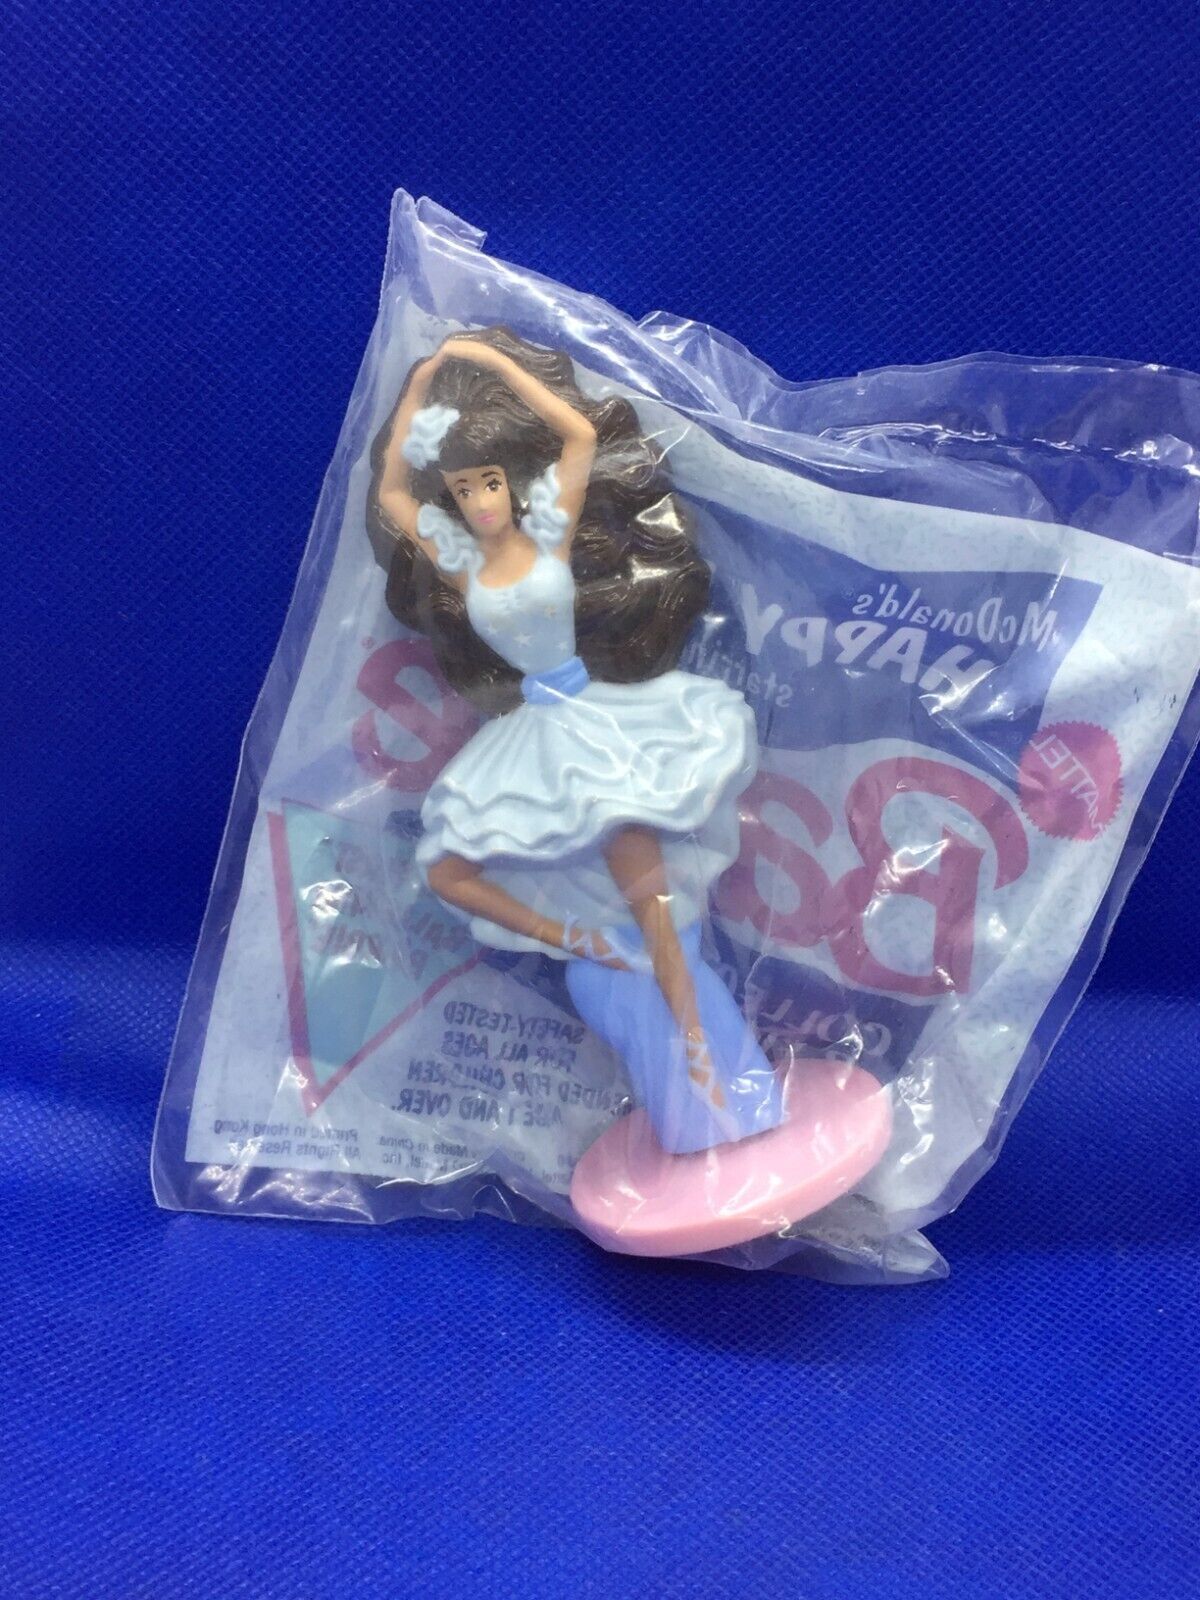 Primary image for My First Ballerina Barbie Figurine McDonalds Happy Meal Toy Vintage 1991